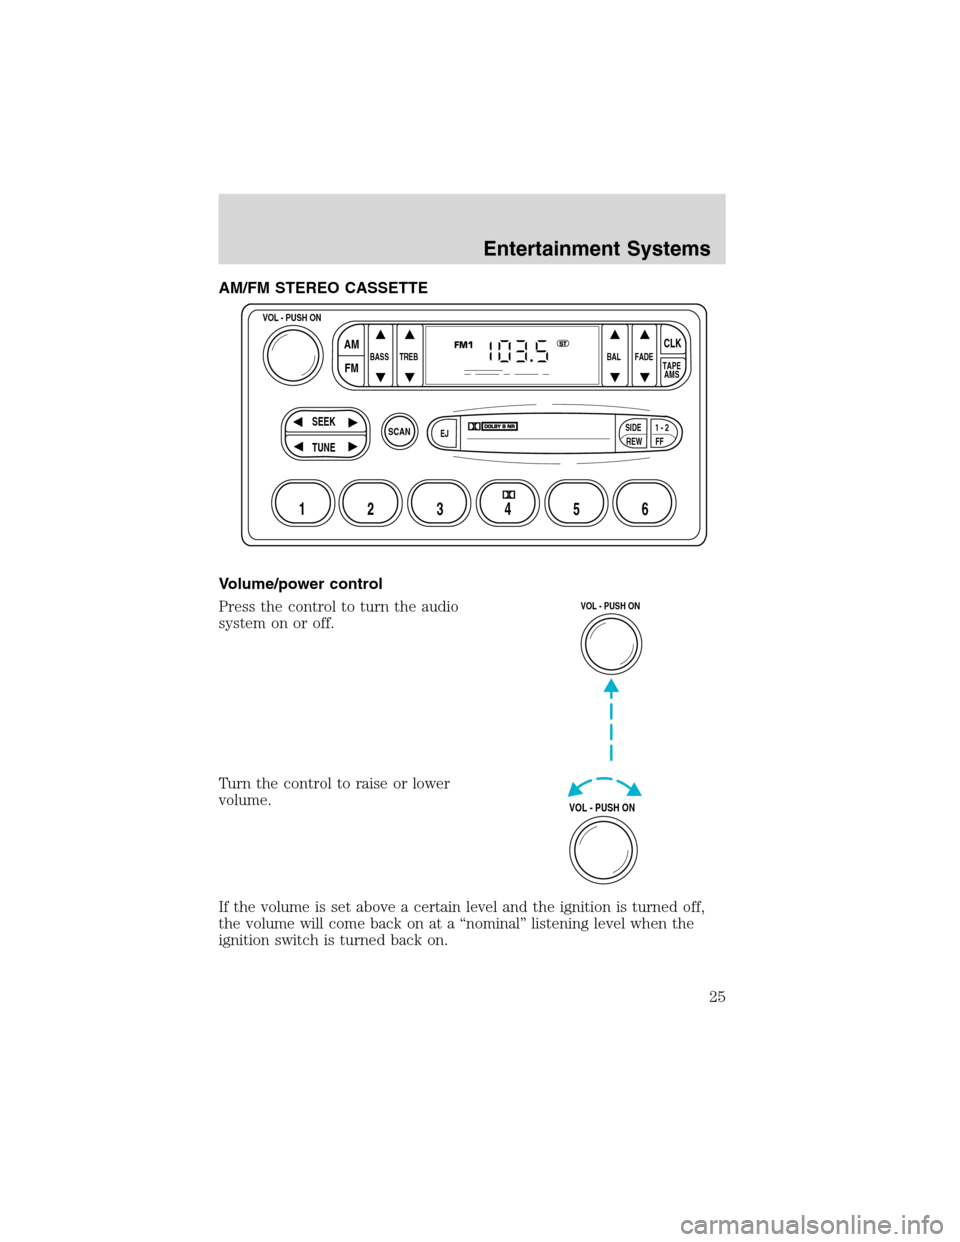 FORD F650 2003 10.G Owners Manual AM/FM STEREO CASSETTE
Volume/power control
Press the control to turn the audio
system on or off.
Turn the control to raise or lower
volume.
If the volume is set above a certain level and the ignition 